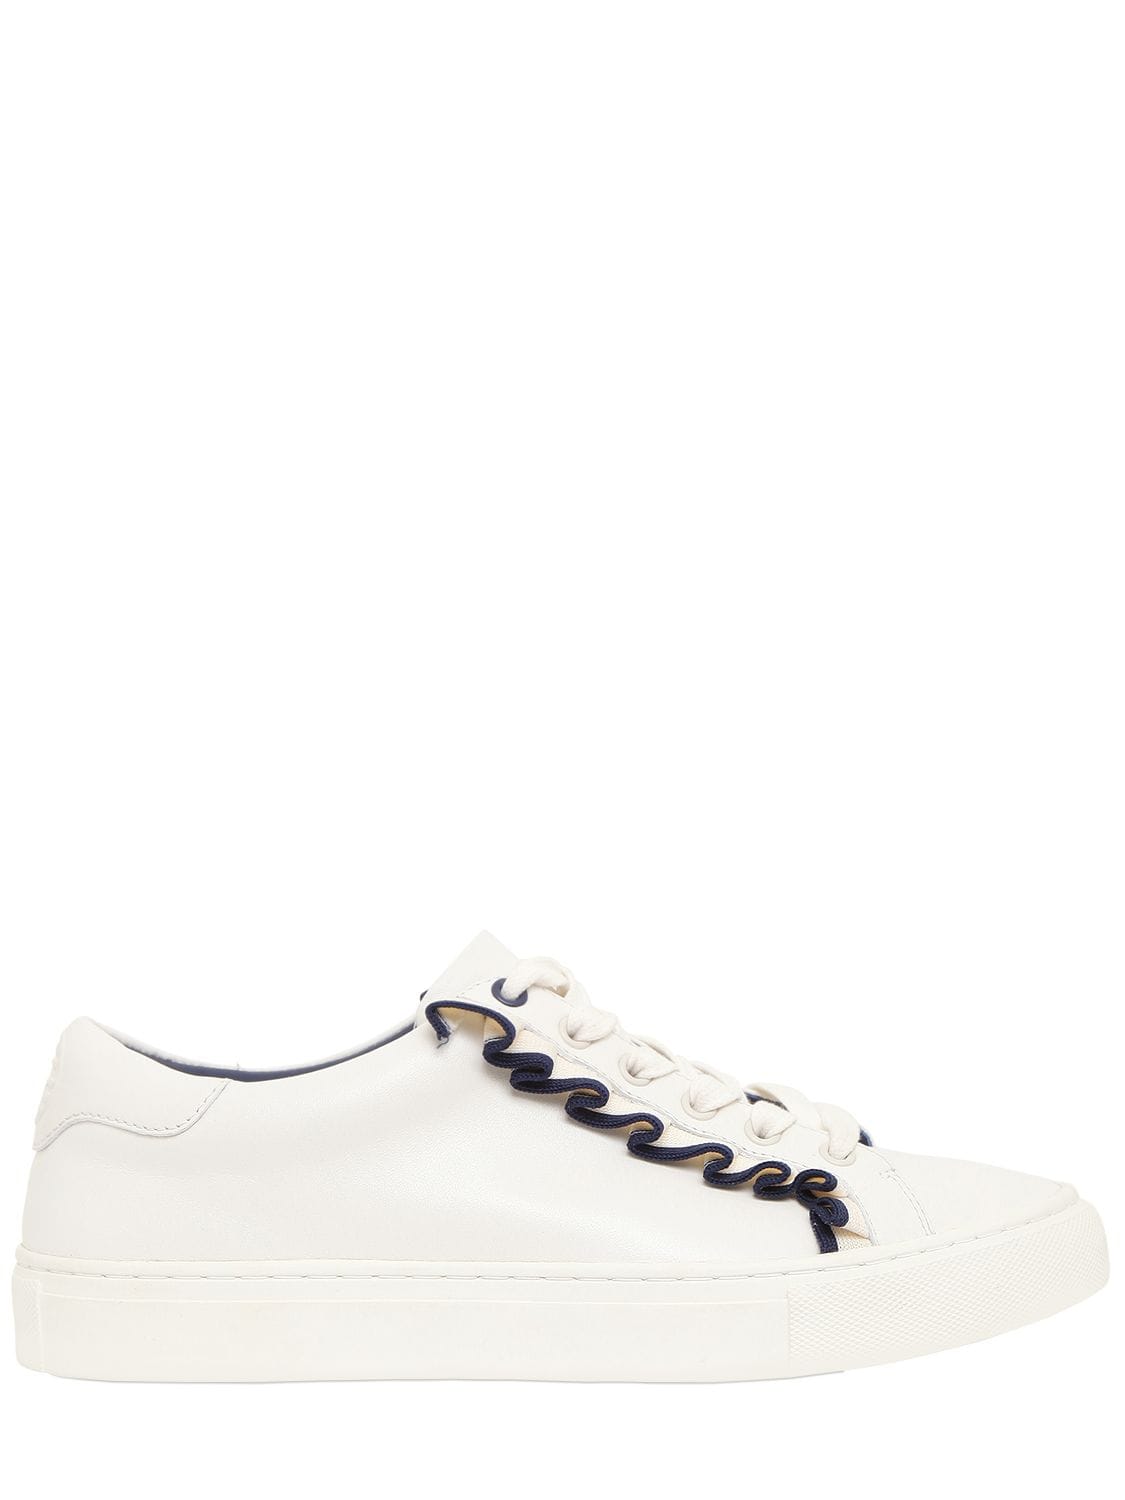 Tory Burch 20mm Ruffled Leather Sneakers In White/blue